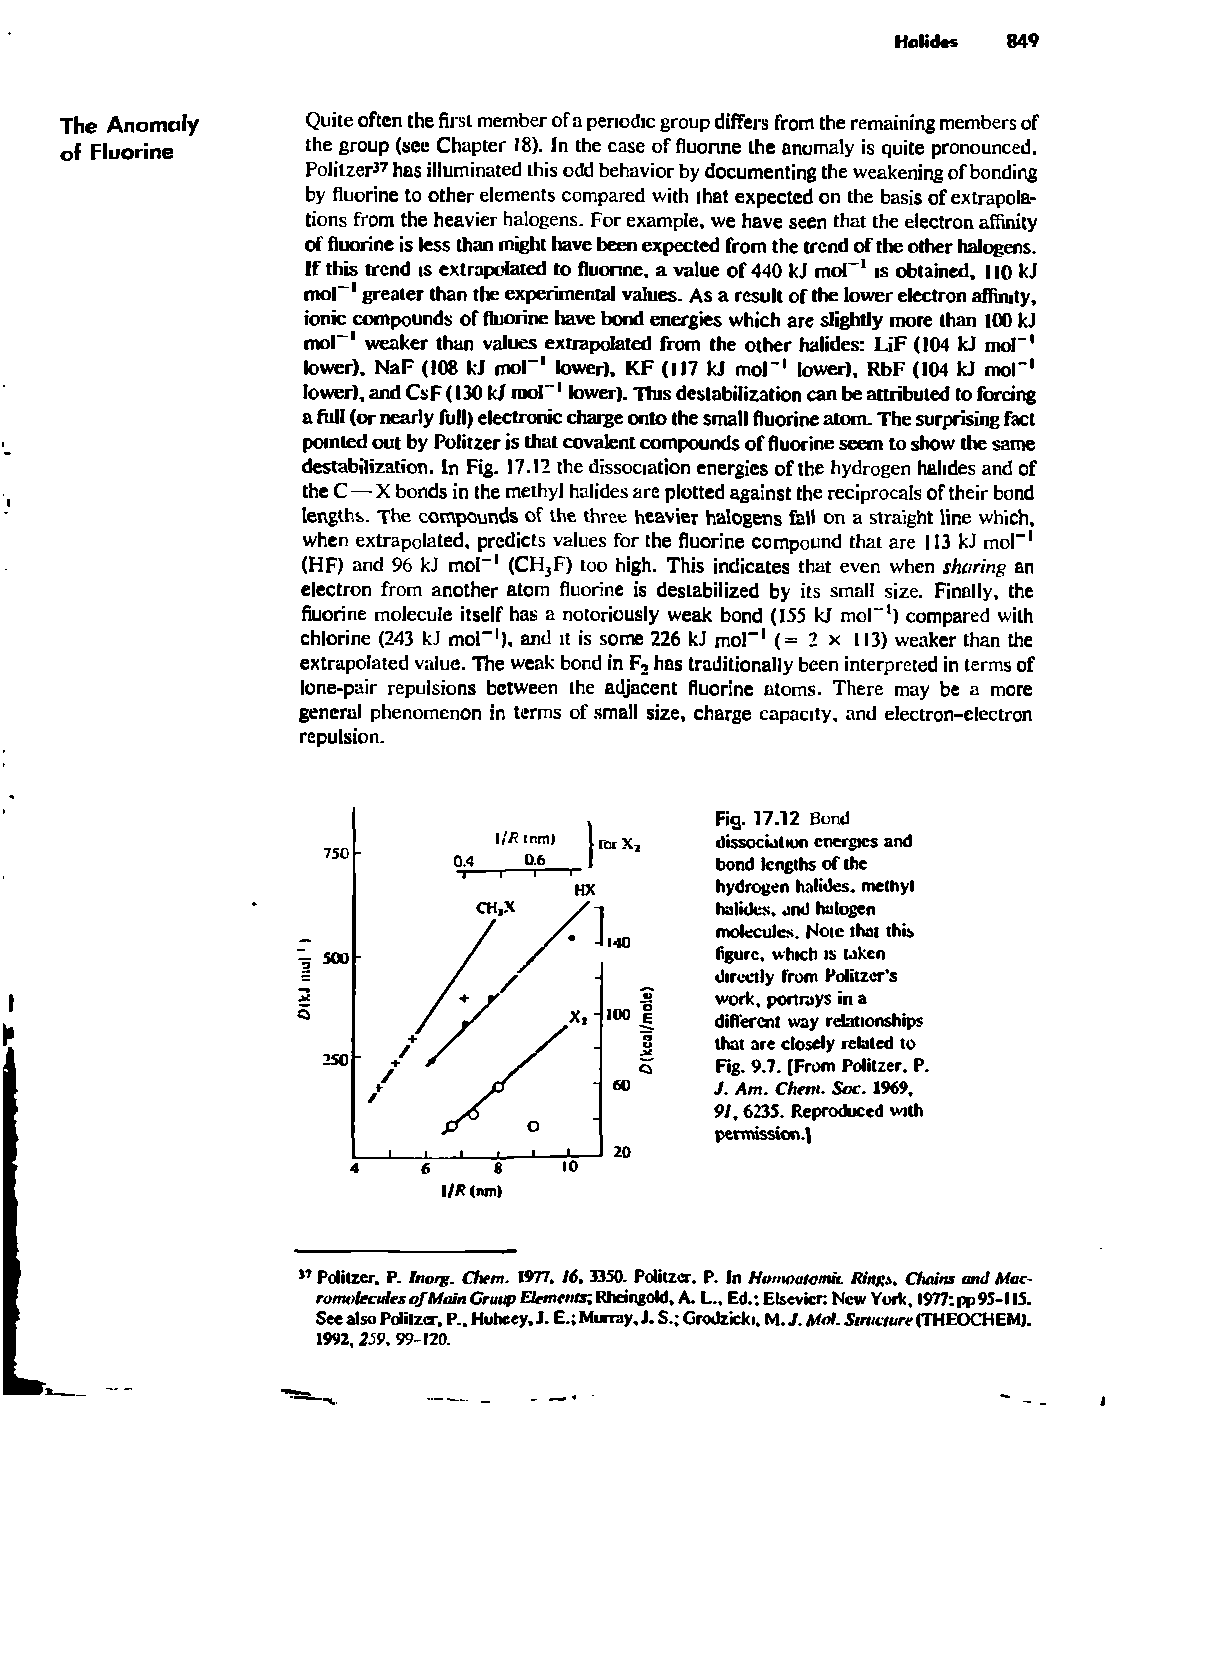 Fig. 17.12 Bond dissociation energies and bond lengths of the hydrogen halides, methyl halides, and halogen molecules. Note that this figure, which is taken directly from Politzcr s work, portrays in a different way relationships that are closely rebled to Fig. 9.7. (From Politzer. P. J. Am. Chetn. See. 1969. 91.6235. Reproduced with permission.)...